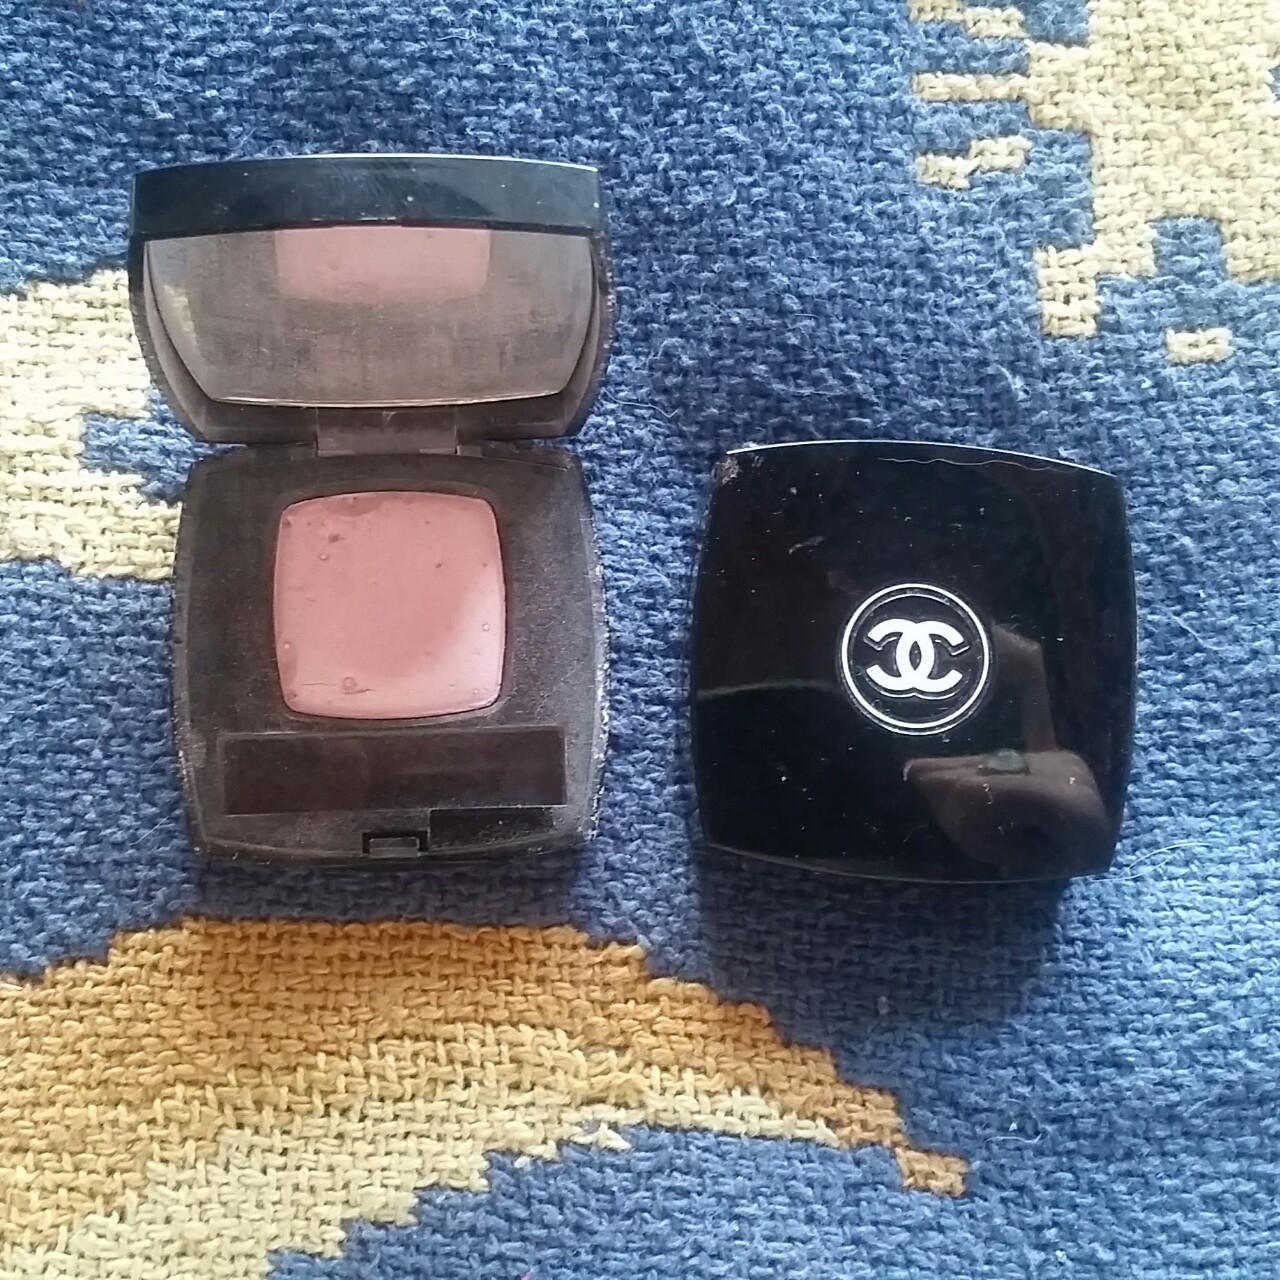 2 Chanel Eyeshadows in shades Frou Frou and Tabou